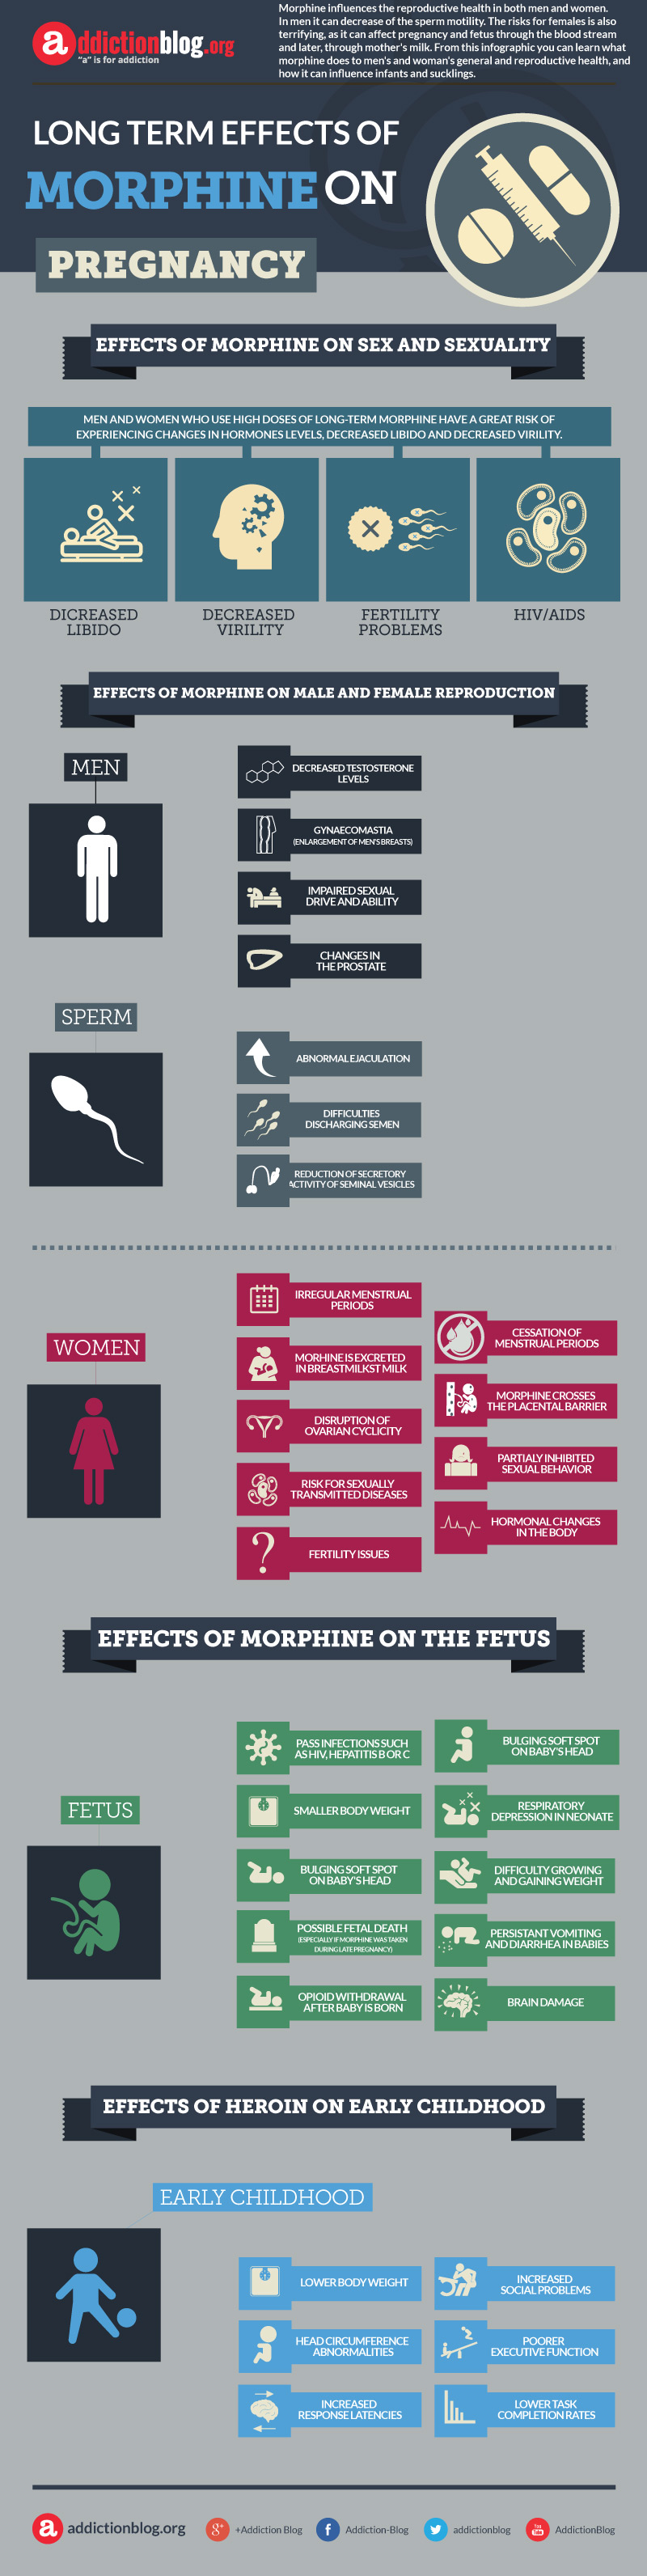 Long term effects of morphine on sex and pregnancy (INFOGRAPHIC)